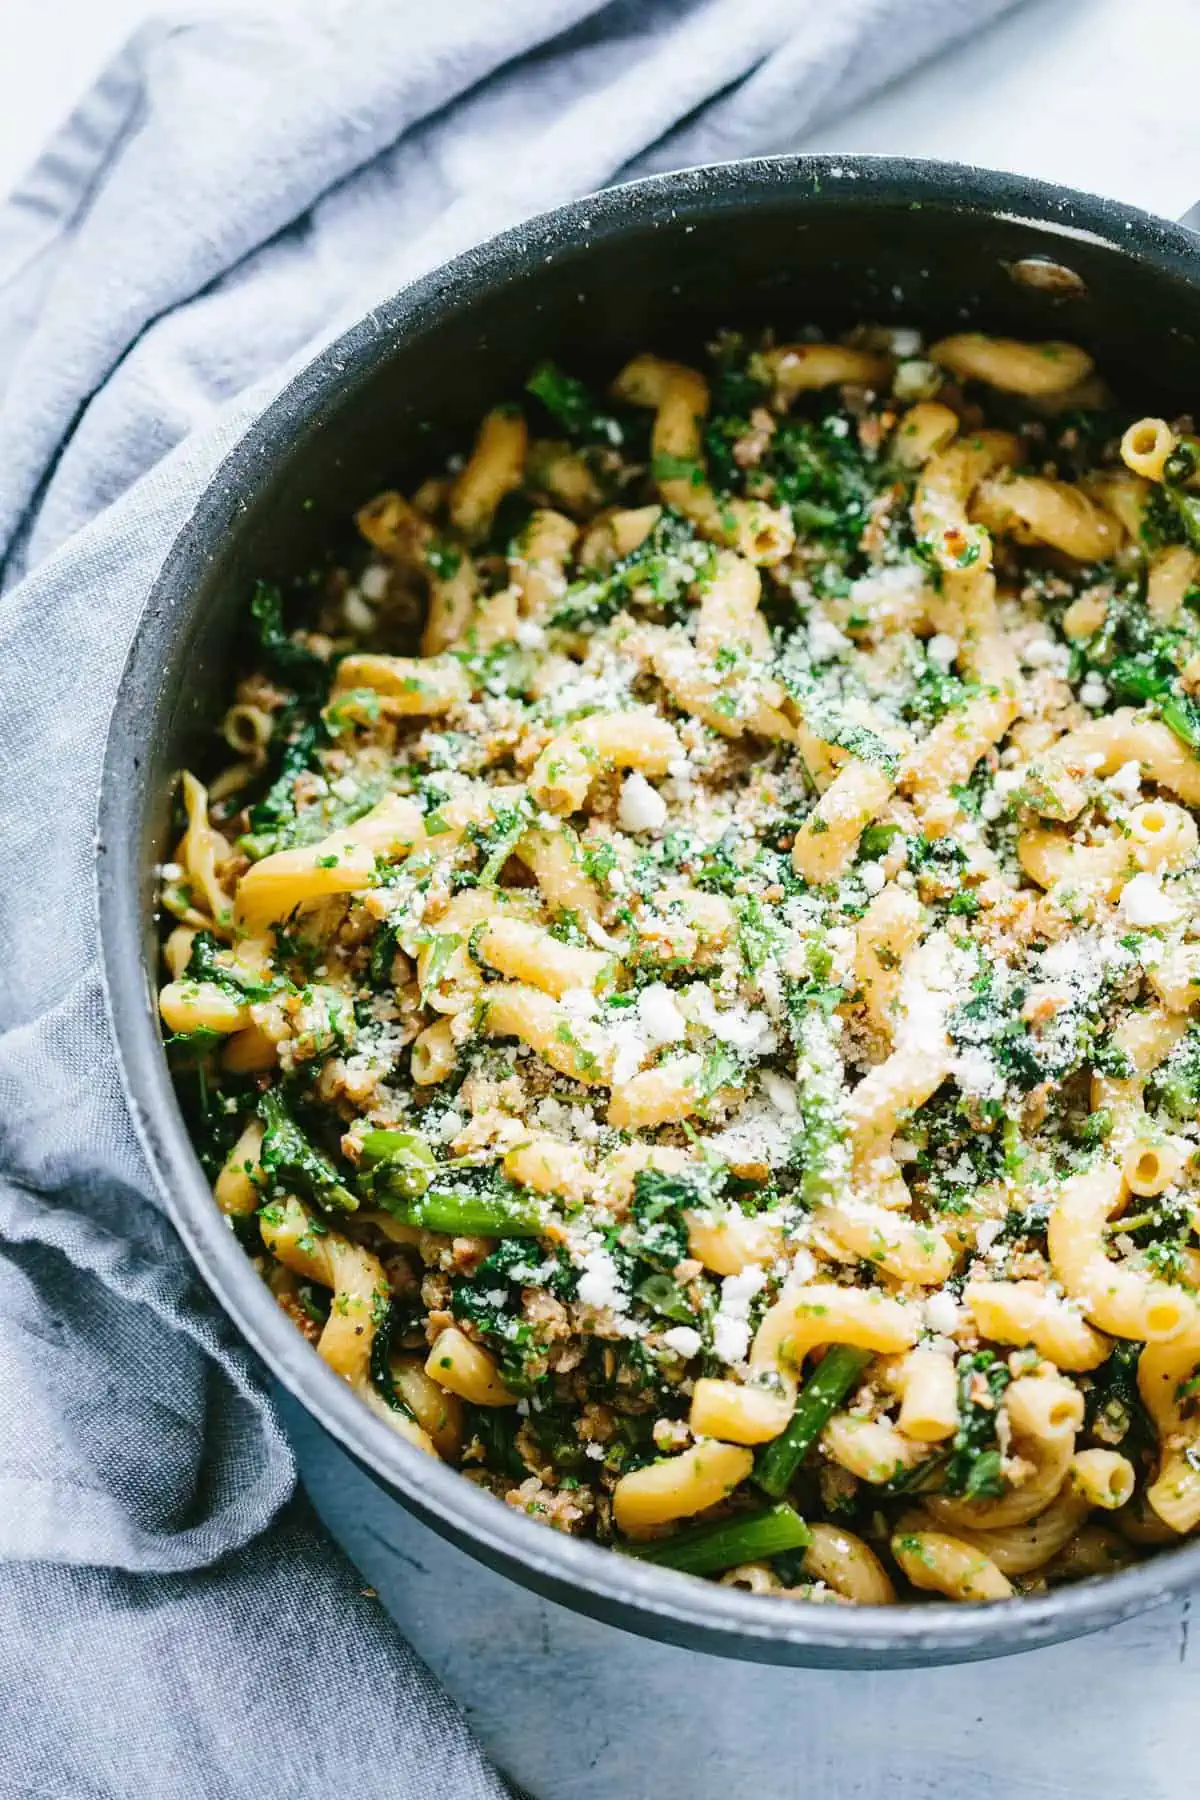 Cast iron skillet filled with broccoli rabe, sausage, and chickpea pasta.